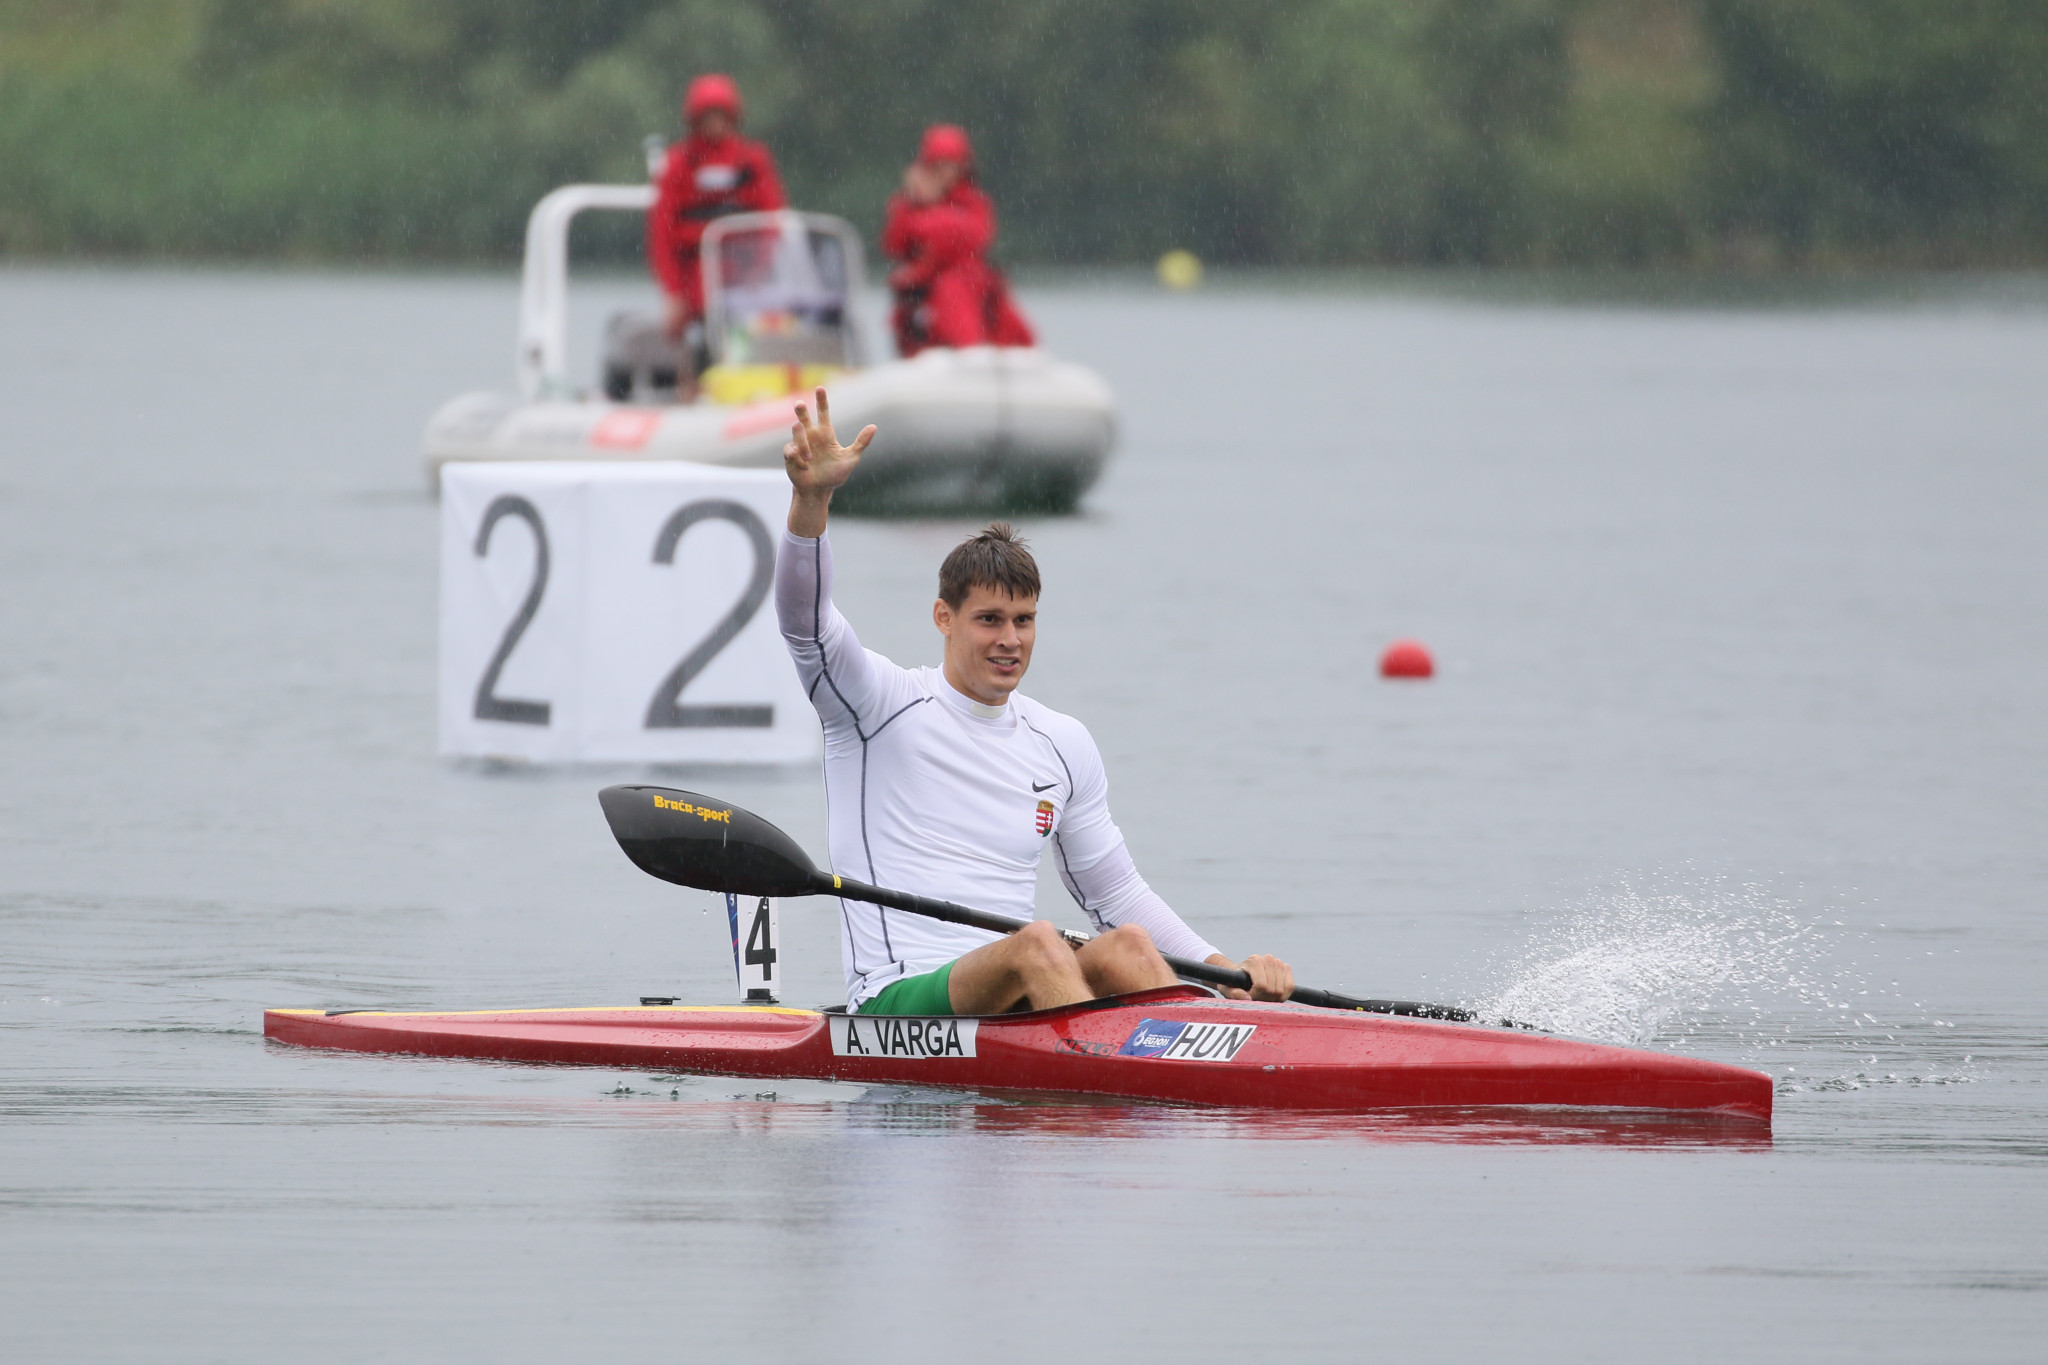 Hungary's Ádám Varga was among the other winners on the final day of canoe sprint, triumphing in the men's K1 500m by more than one second ©Kraków-Małopolska 2023